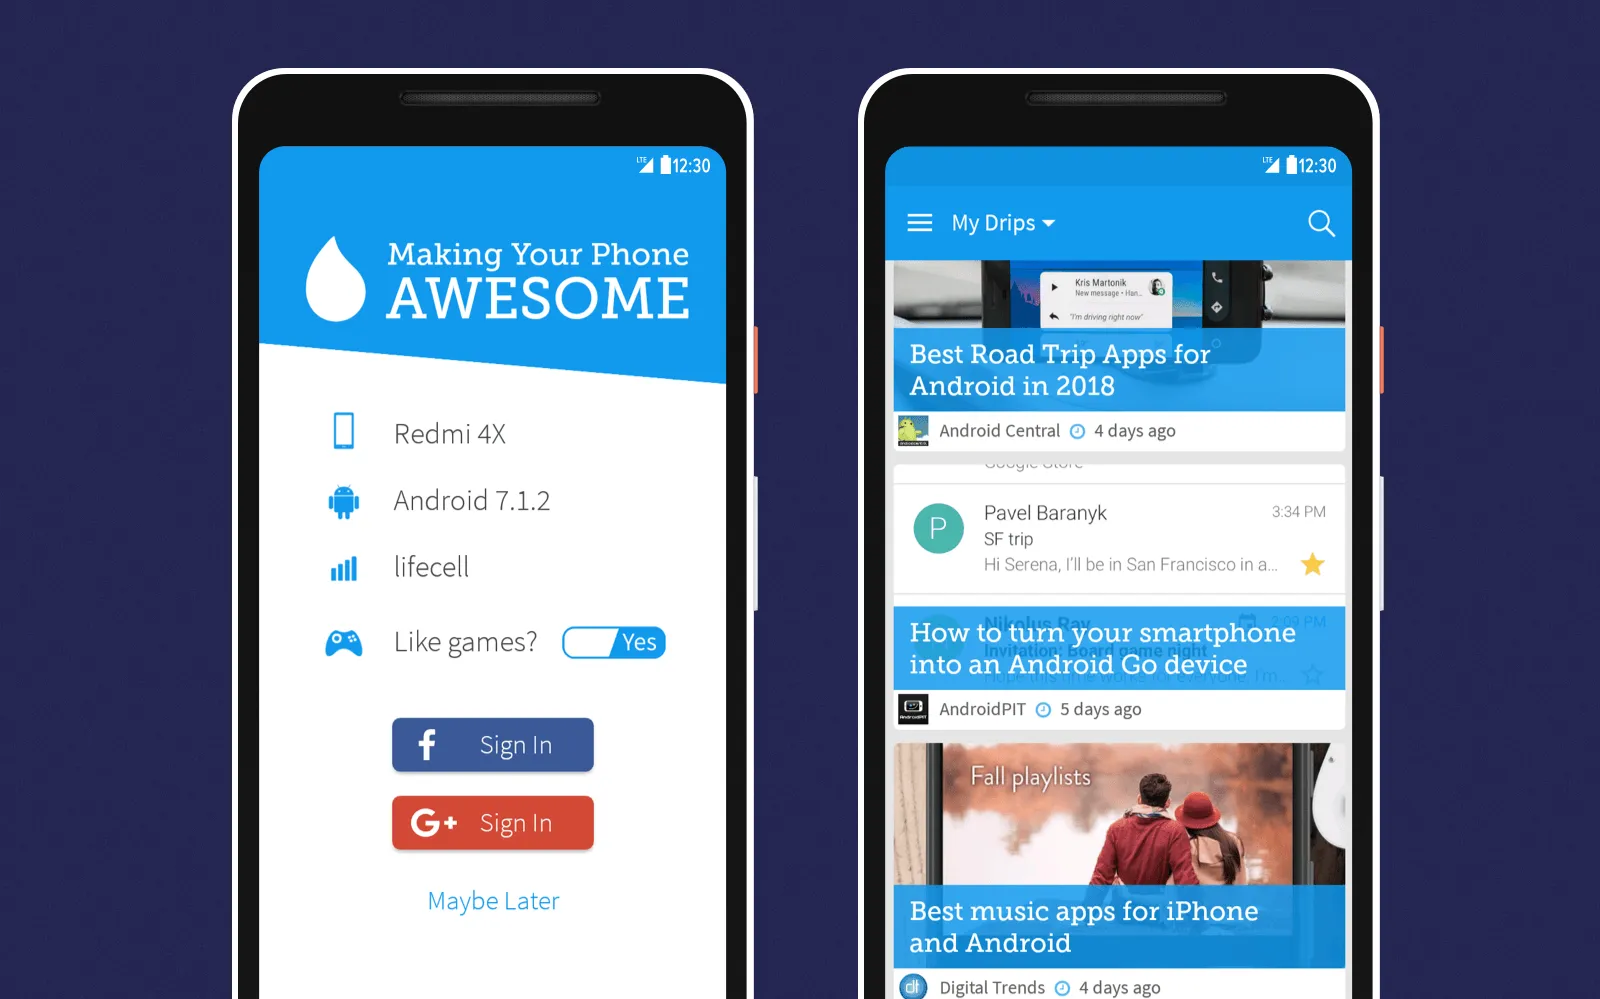 Drippler is a personalized software that can offer updates for your mobile device